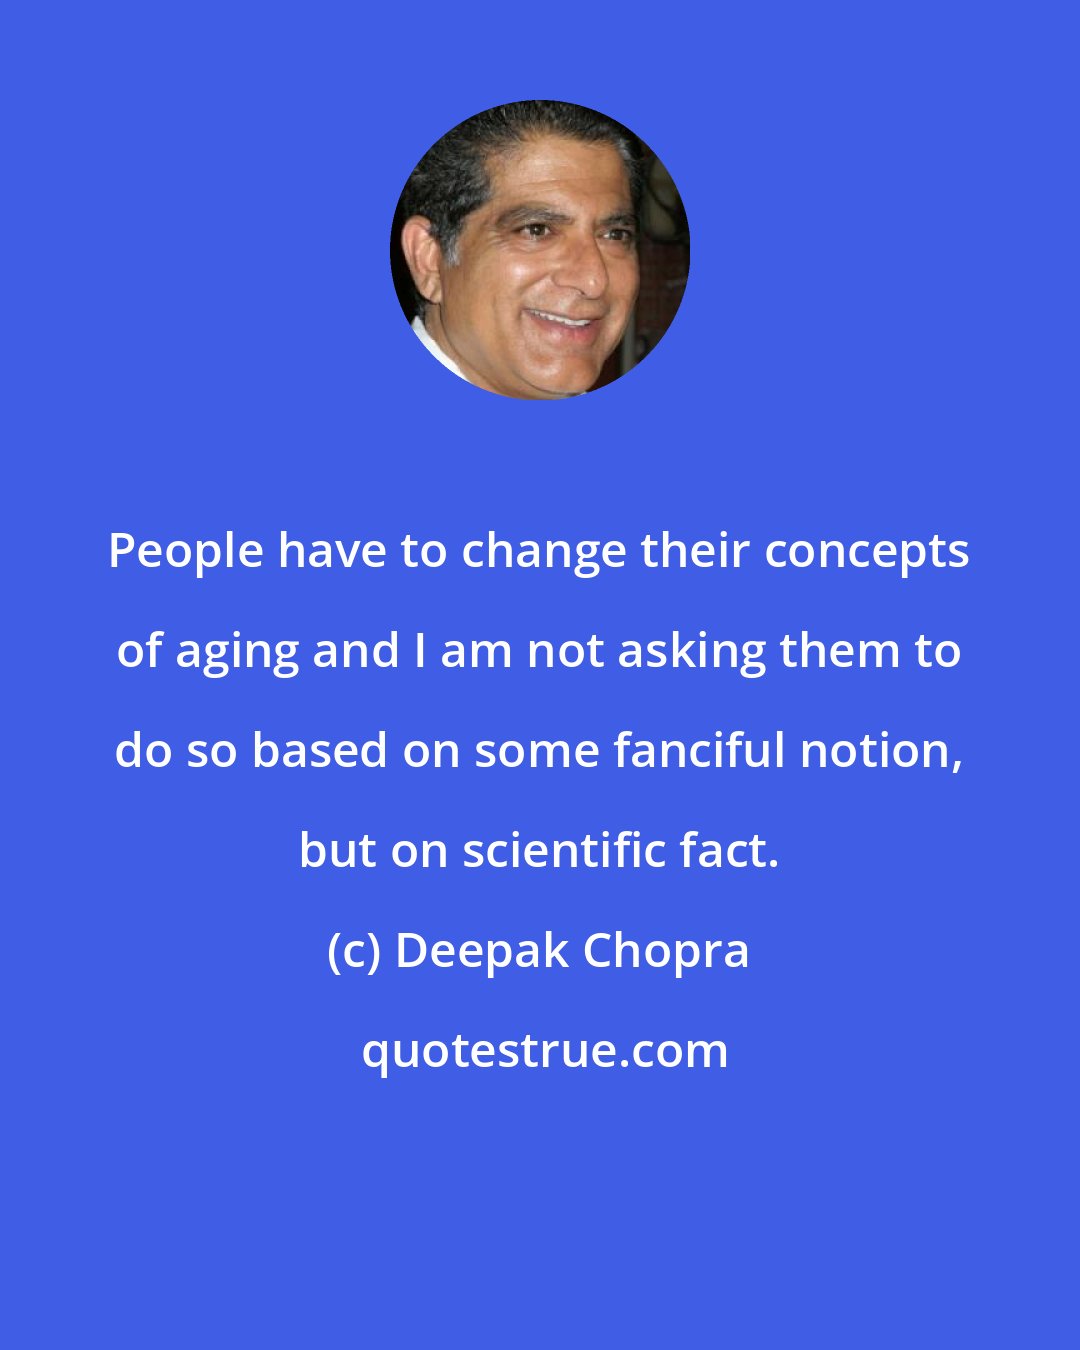 Deepak Chopra: People have to change their concepts of aging and I am not asking them to do so based on some fanciful notion, but on scientific fact.